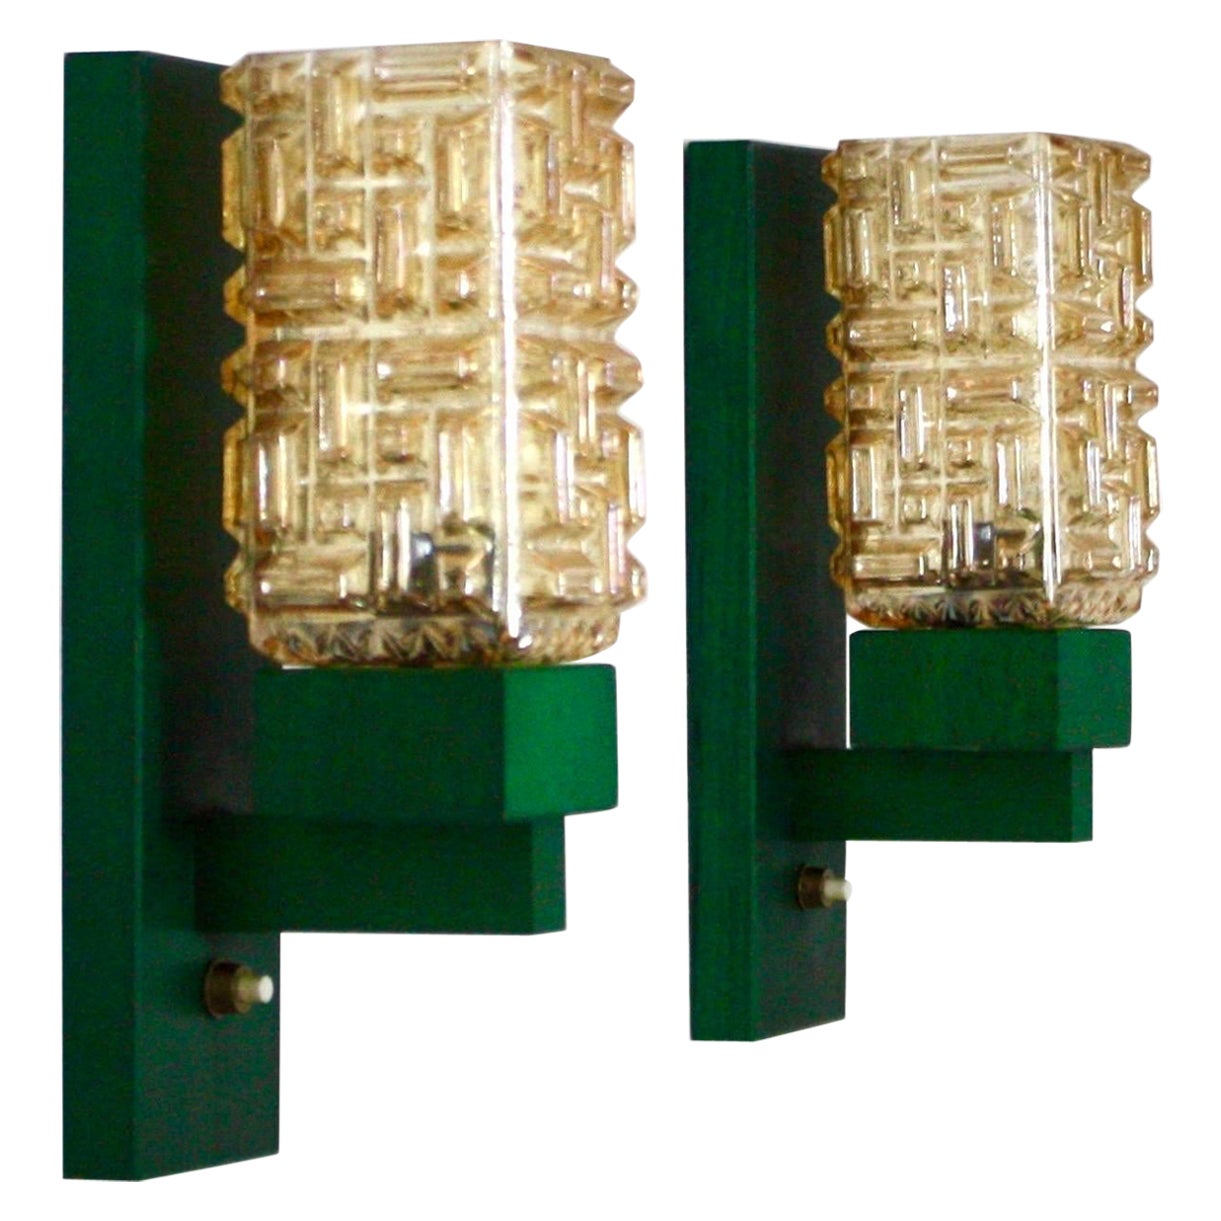 Set of 'Vitrika' Wall Lamps in green stained wood & Amber Glass, Denmark, 1970s For Sale